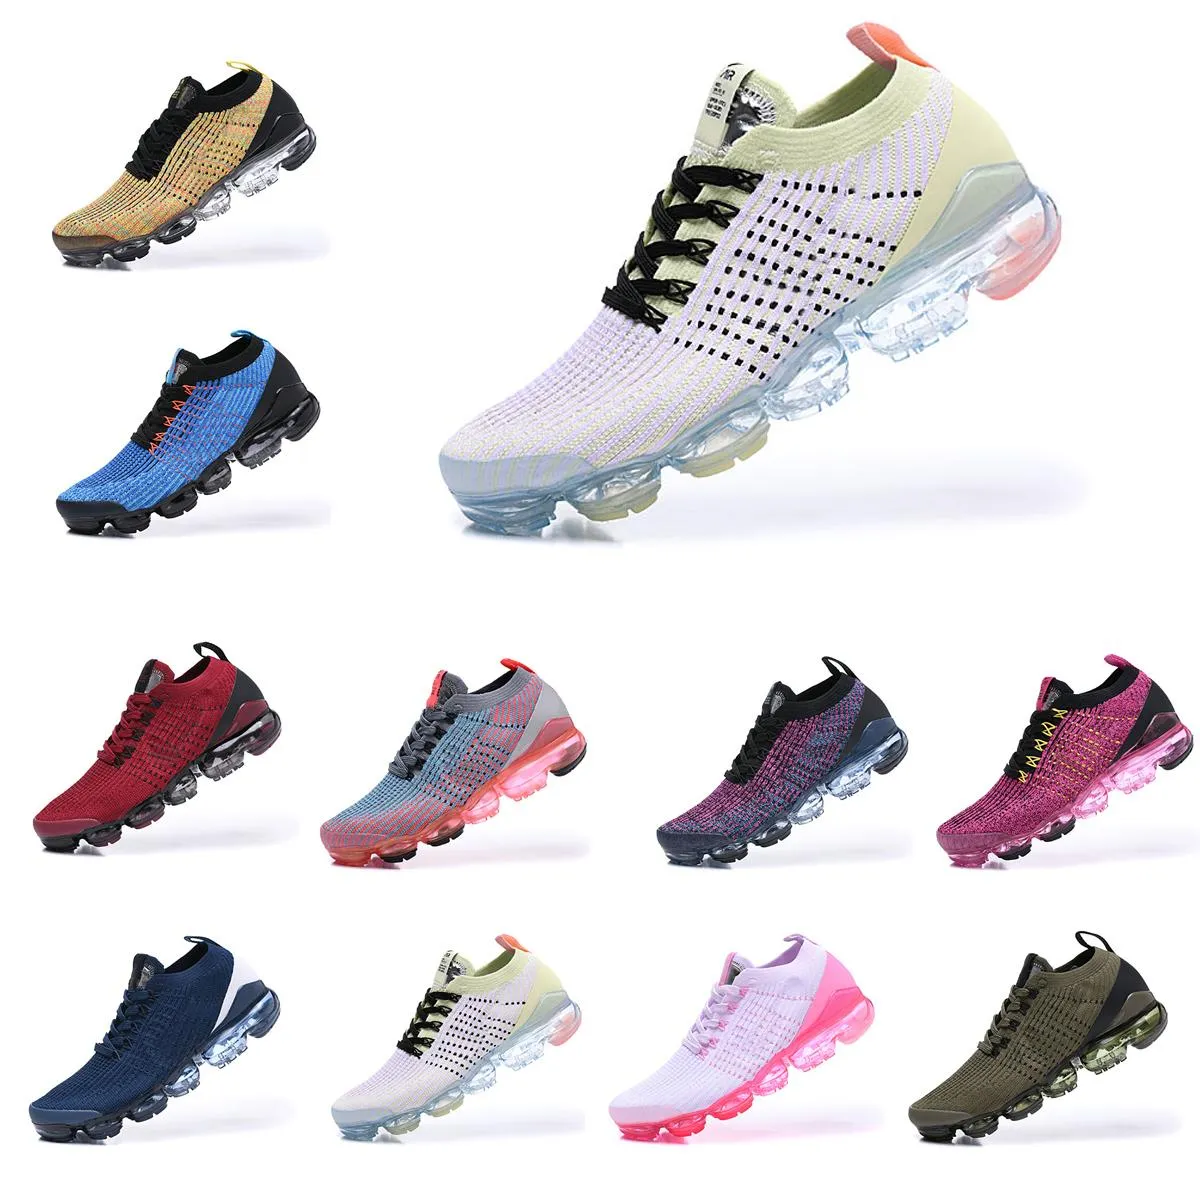 With Box 2019 Top Quality Mens Running Shoes 3.0 Casual Shoes Men Women Fashion Athletic Sports Shoe Designers Corss Maxes Shoes Size 36-45